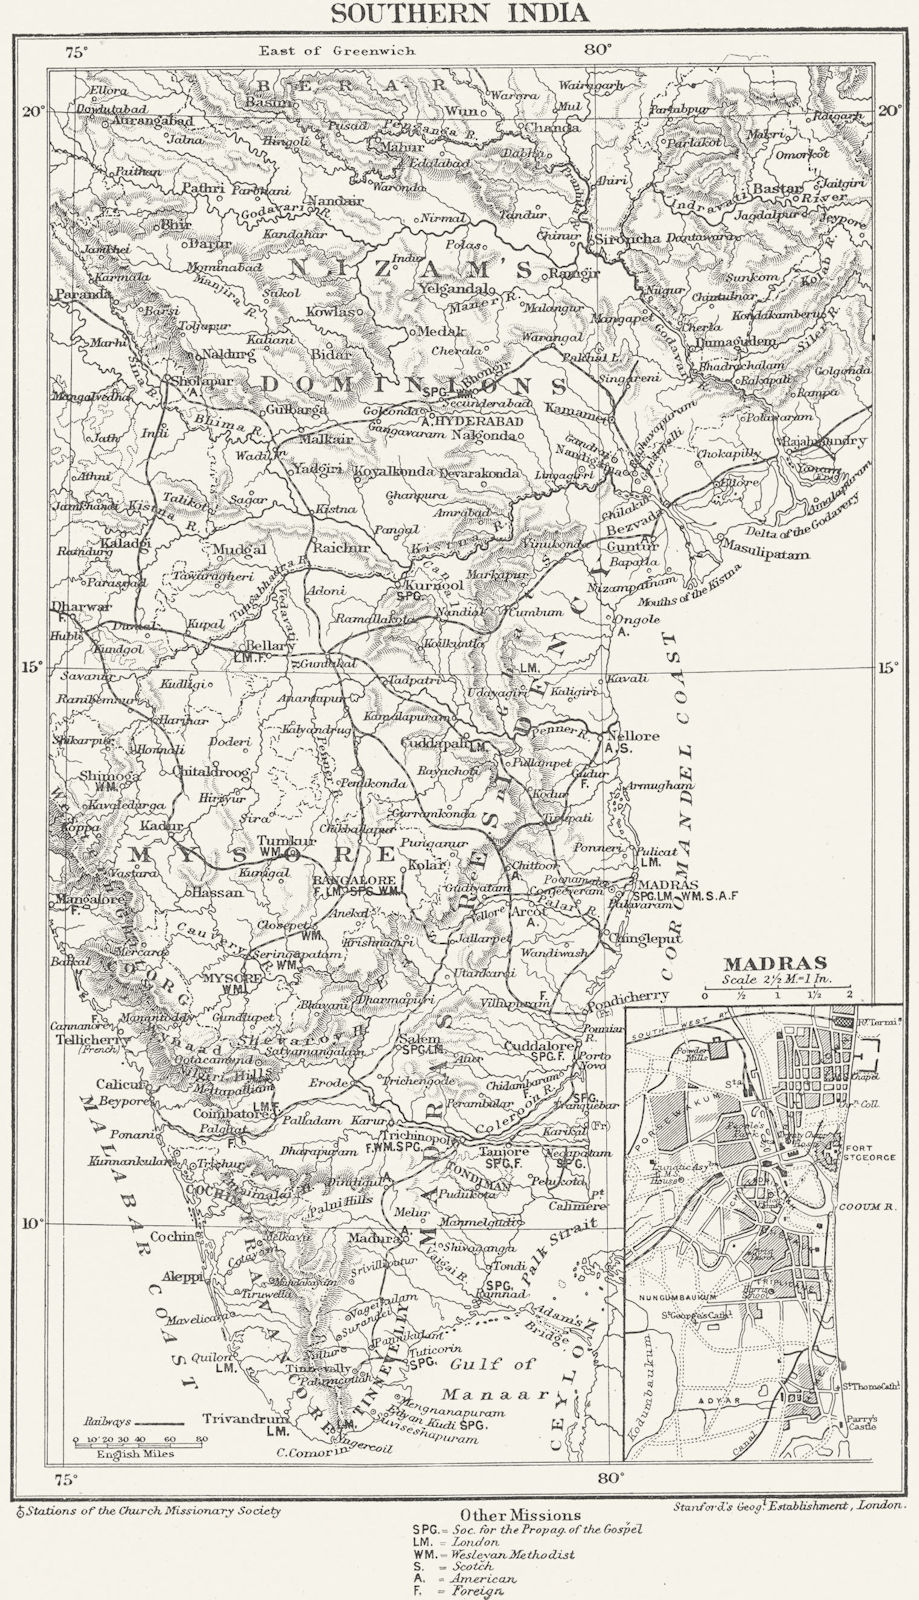 SOUTH INDIA. Protestant Anglican Church Missionary stations. Madras 1897 map